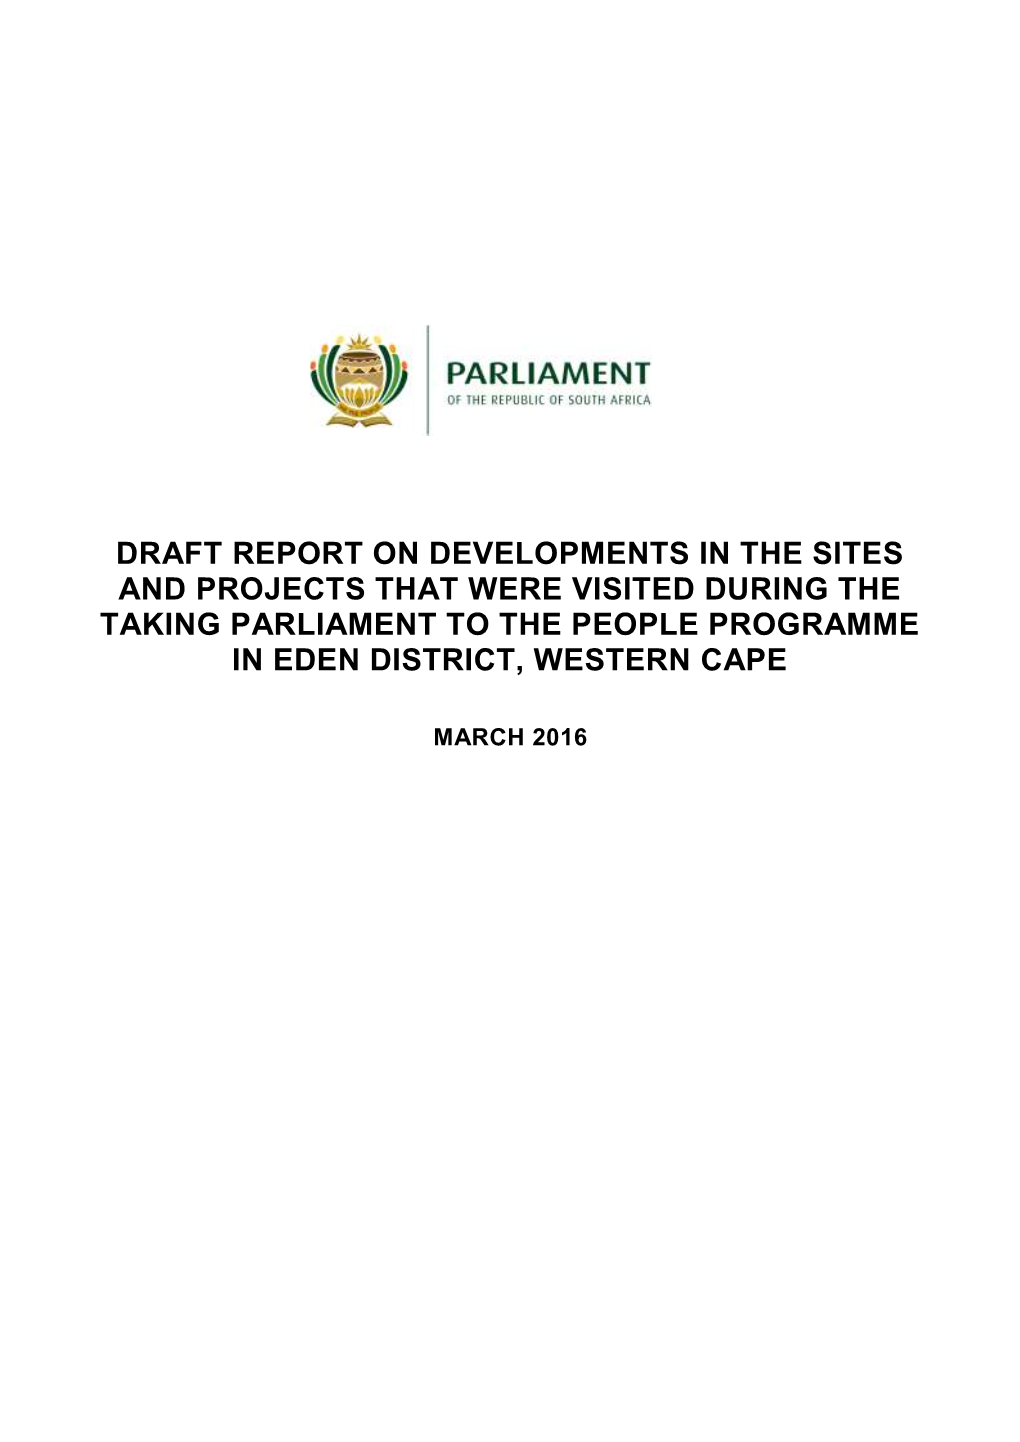 Draft Report on Developments in the Sites and Projects That Were Visited During the Taking Parliament to the People Programme in Eden District, Western Cape